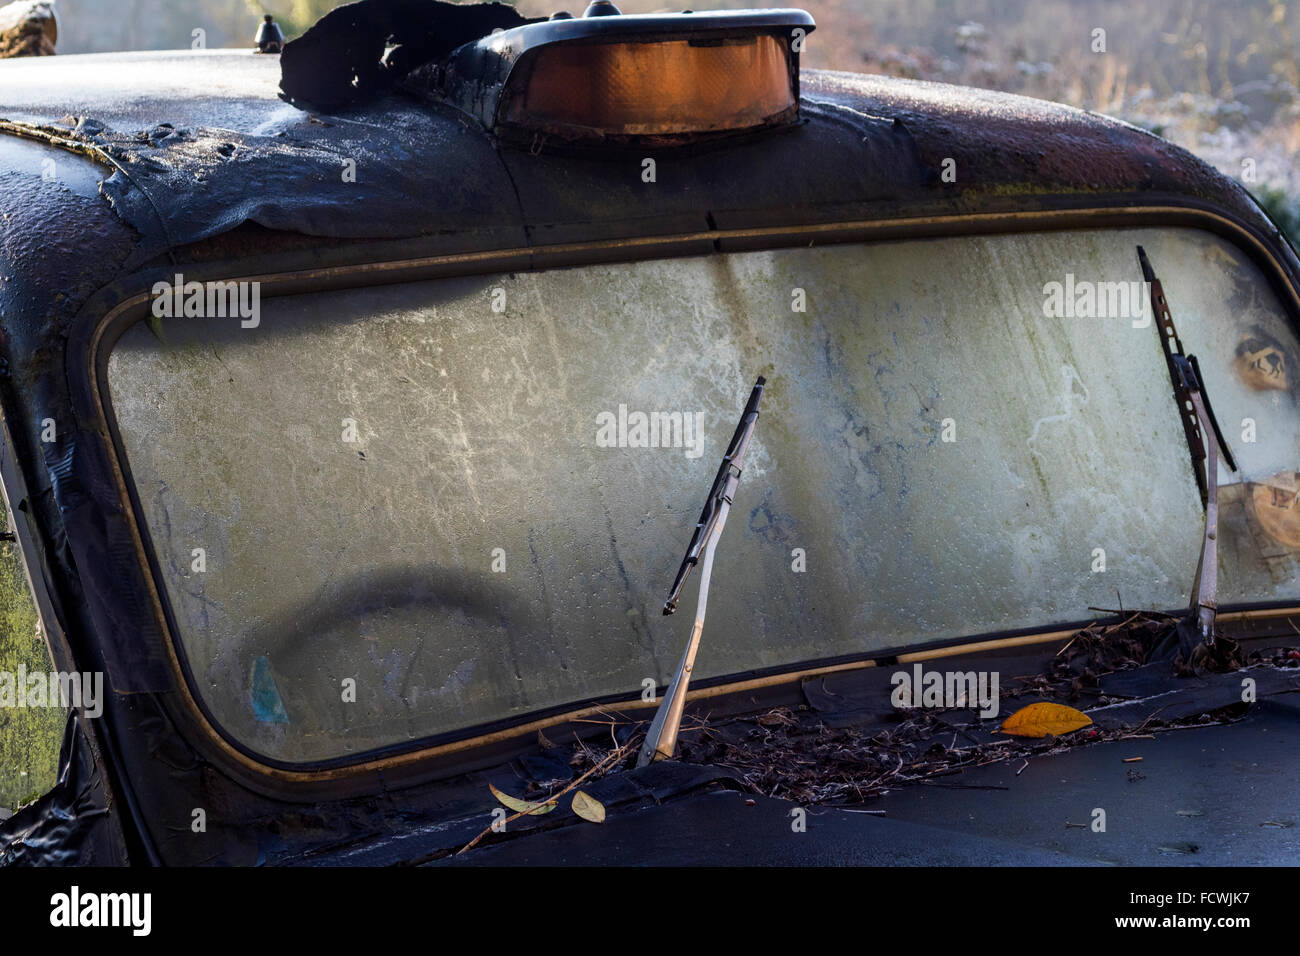 Black Cab to Nowhere: Abandoned Rusting and Dilapidated London Cab. Stock Photo